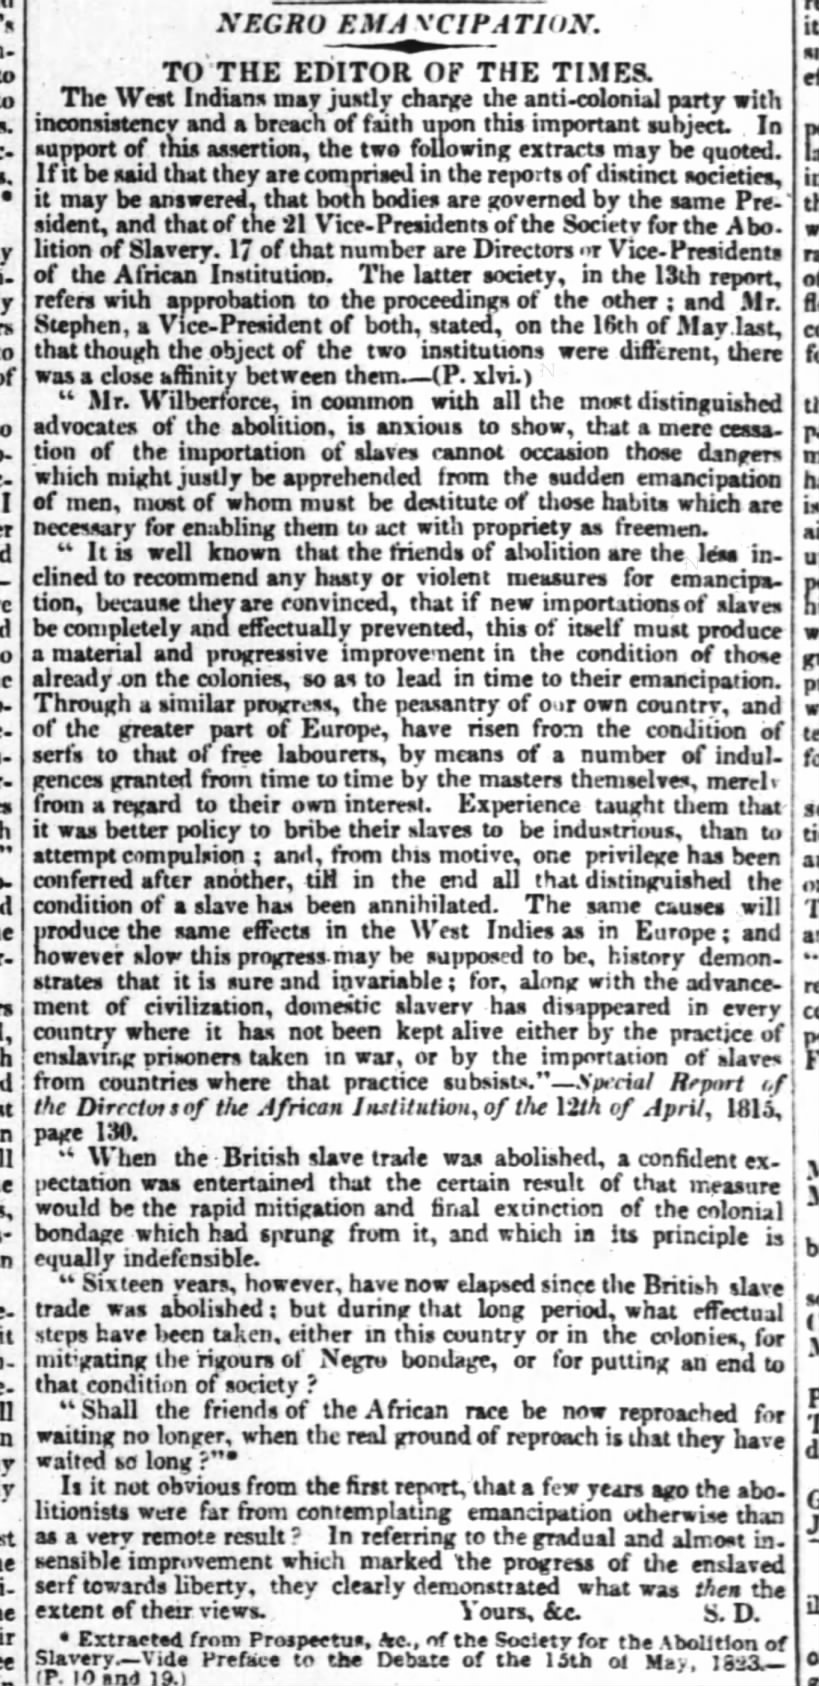 The Times (London, ) 12 January 1824 Page: Page 3 Page 3